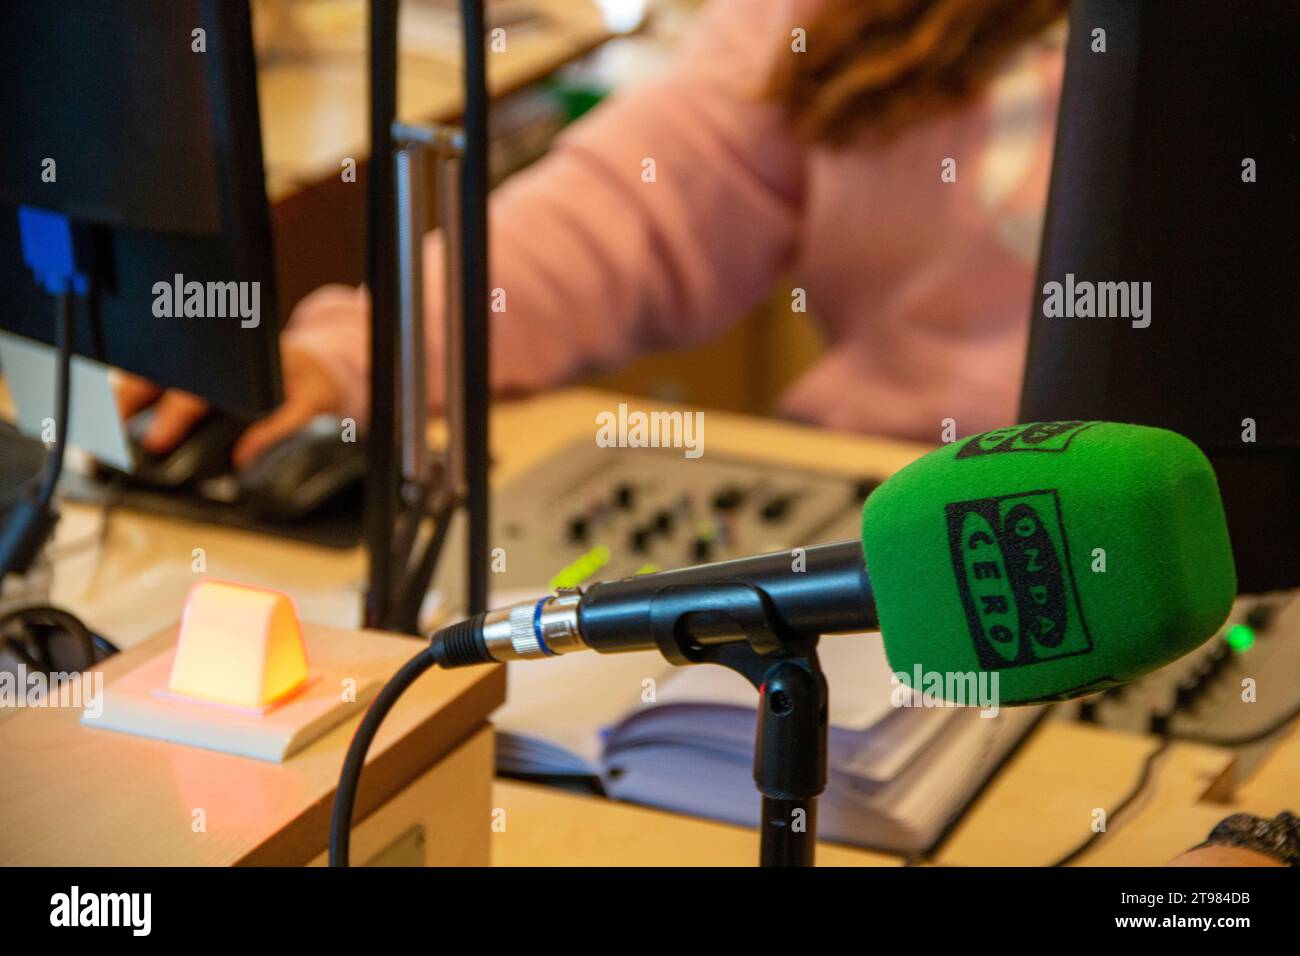 A morning of talk on the radio, on Onda Cero, with its talk shows, microphones, mixing consoles and presenters Stock Photo